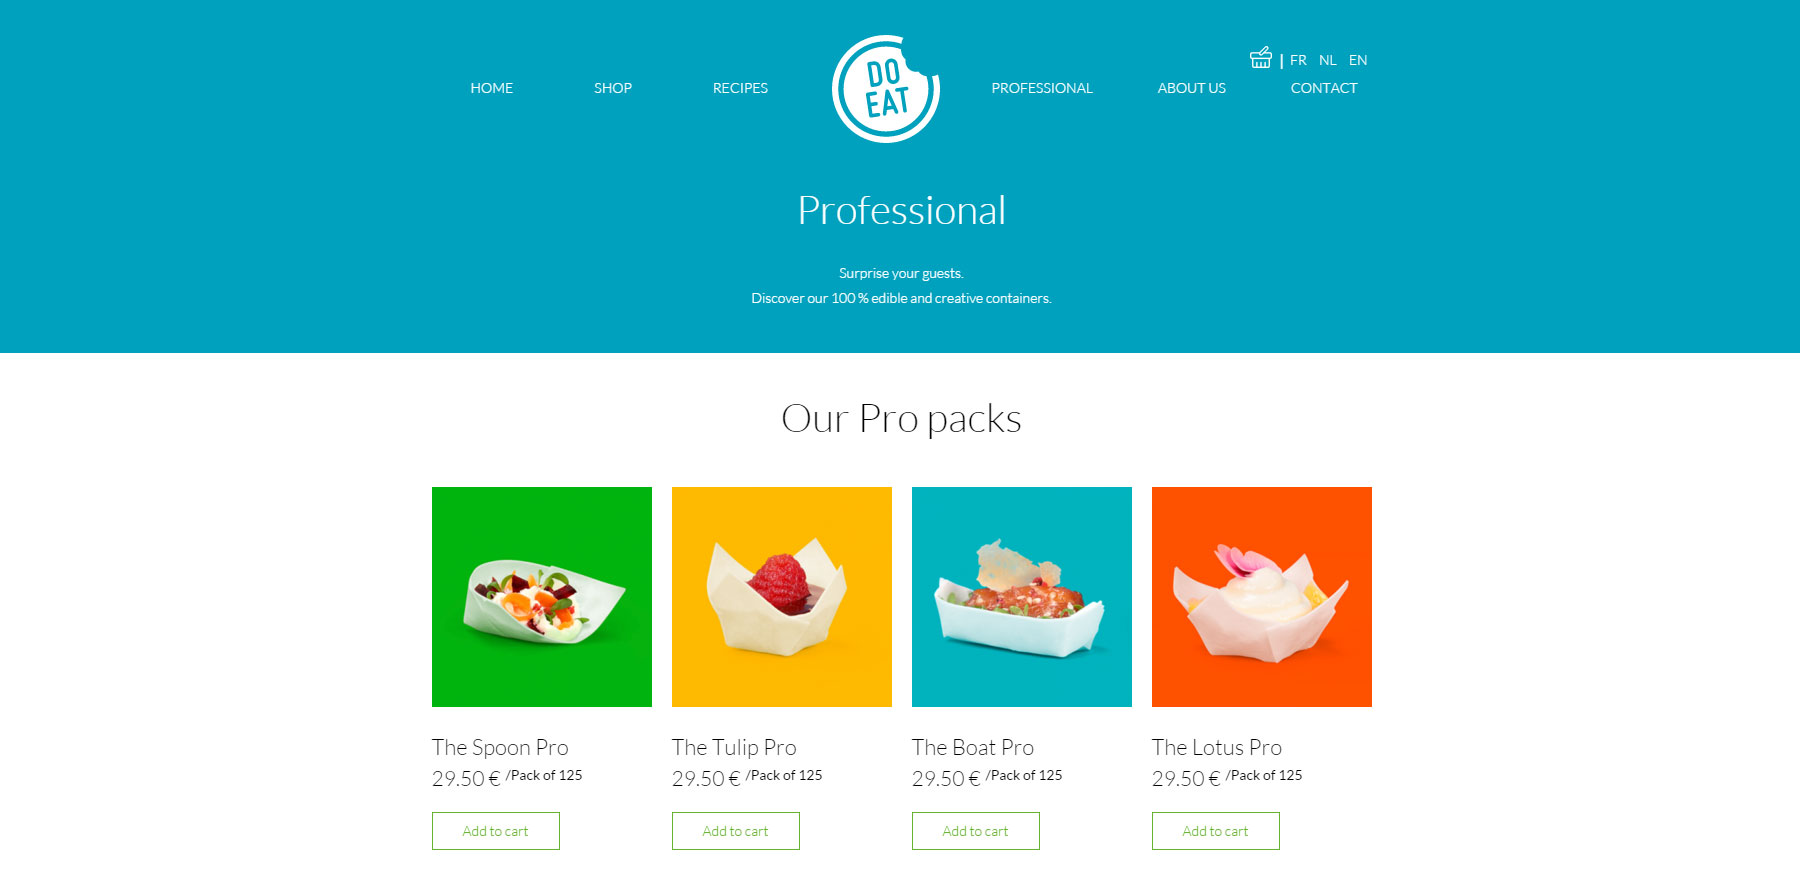 Do Eat - Website of the Day